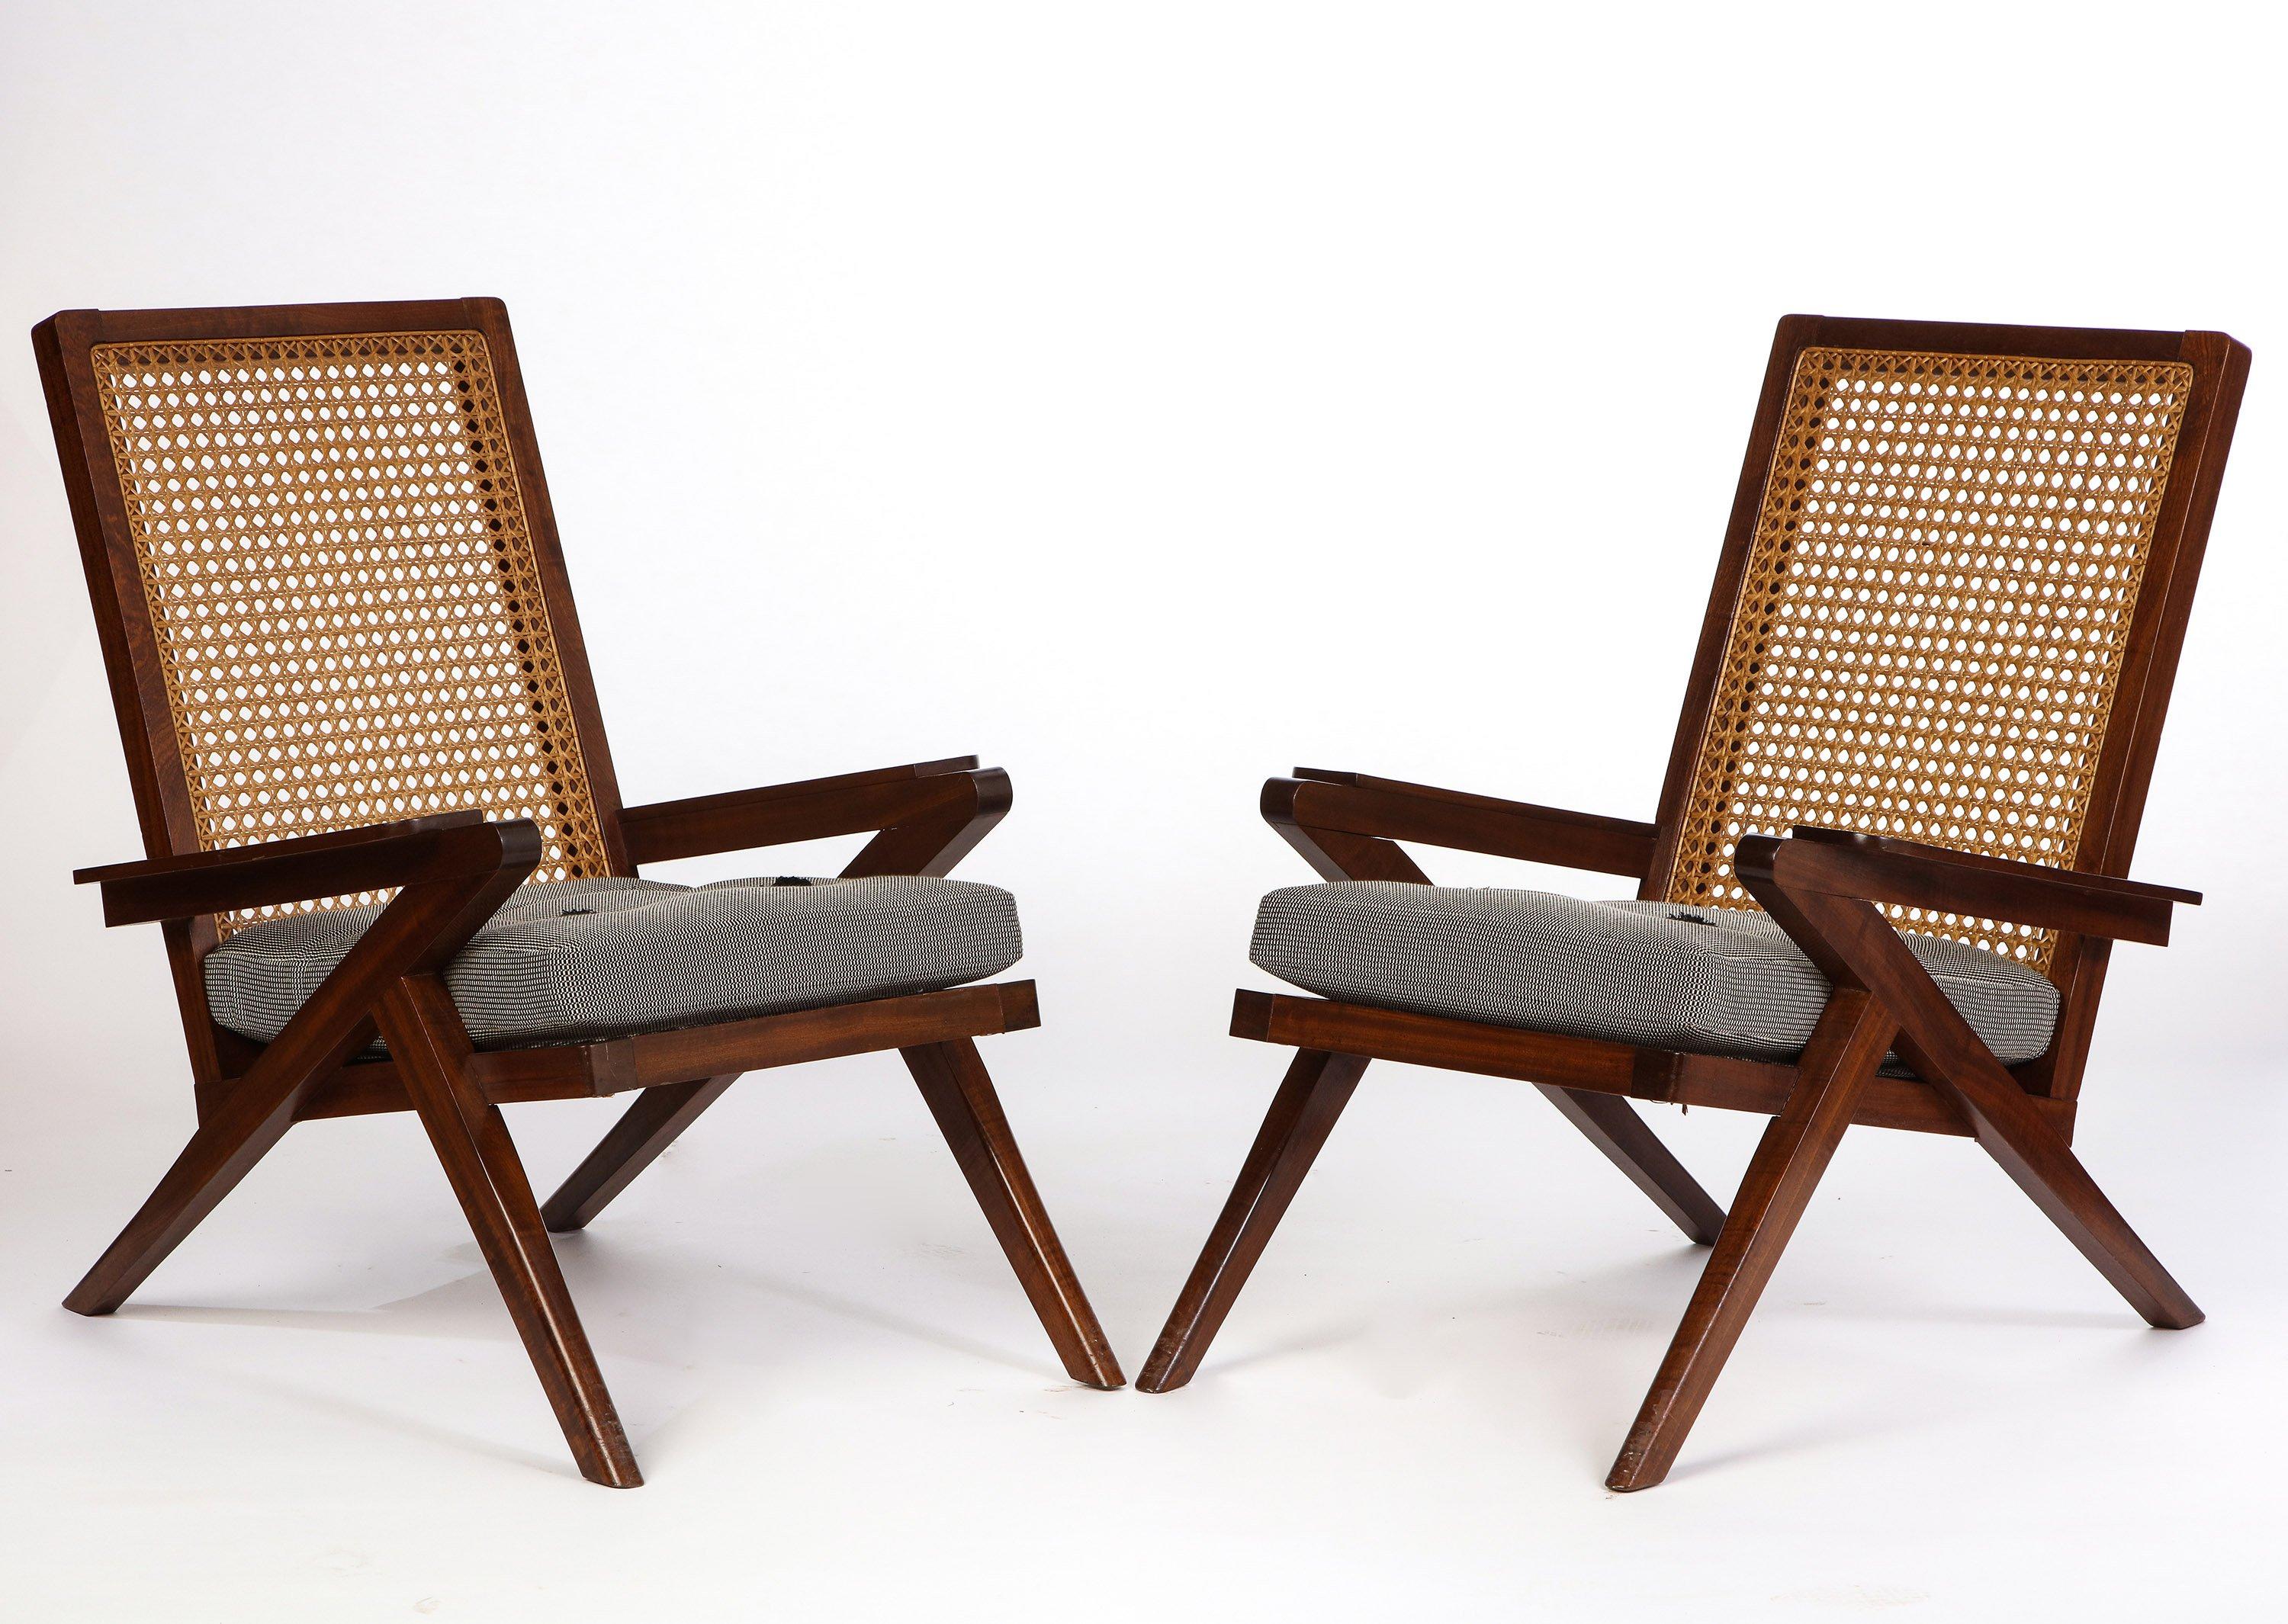 A pair of French ‘Art Moderne’ style mahogany and caned armchairs with upholstered cushions from the 20th century. These chairs are composed of a varnished mahogany structure and caned seat made comfortable with custom upholstered cushions. The